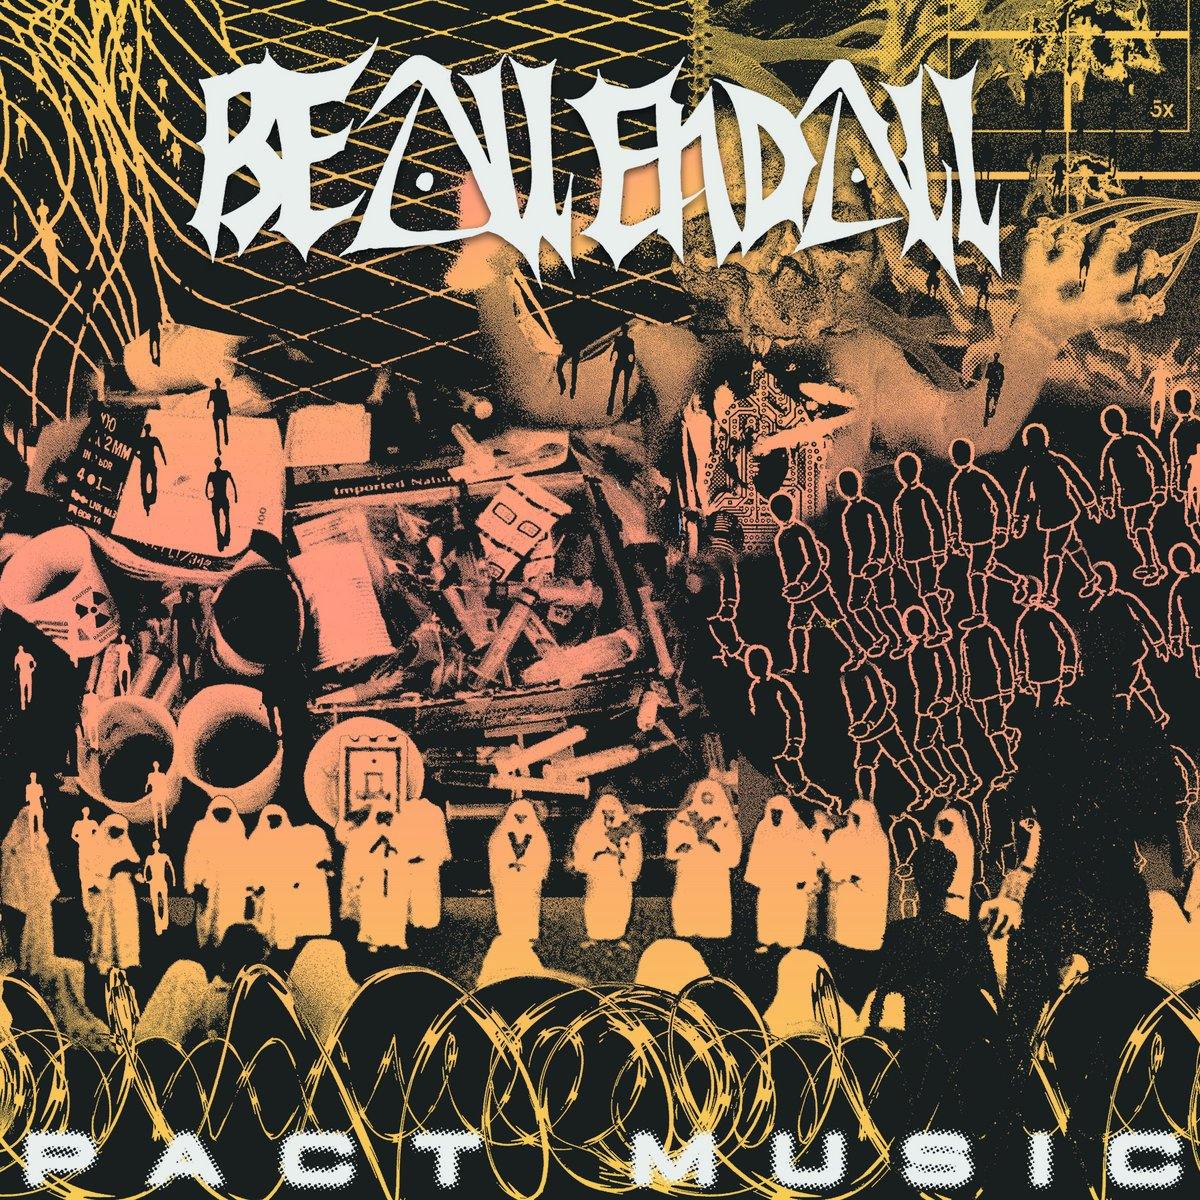 Buy – Be All End All "Pact Music" 12" – Band & Music Merch – Cold Cuts Merch